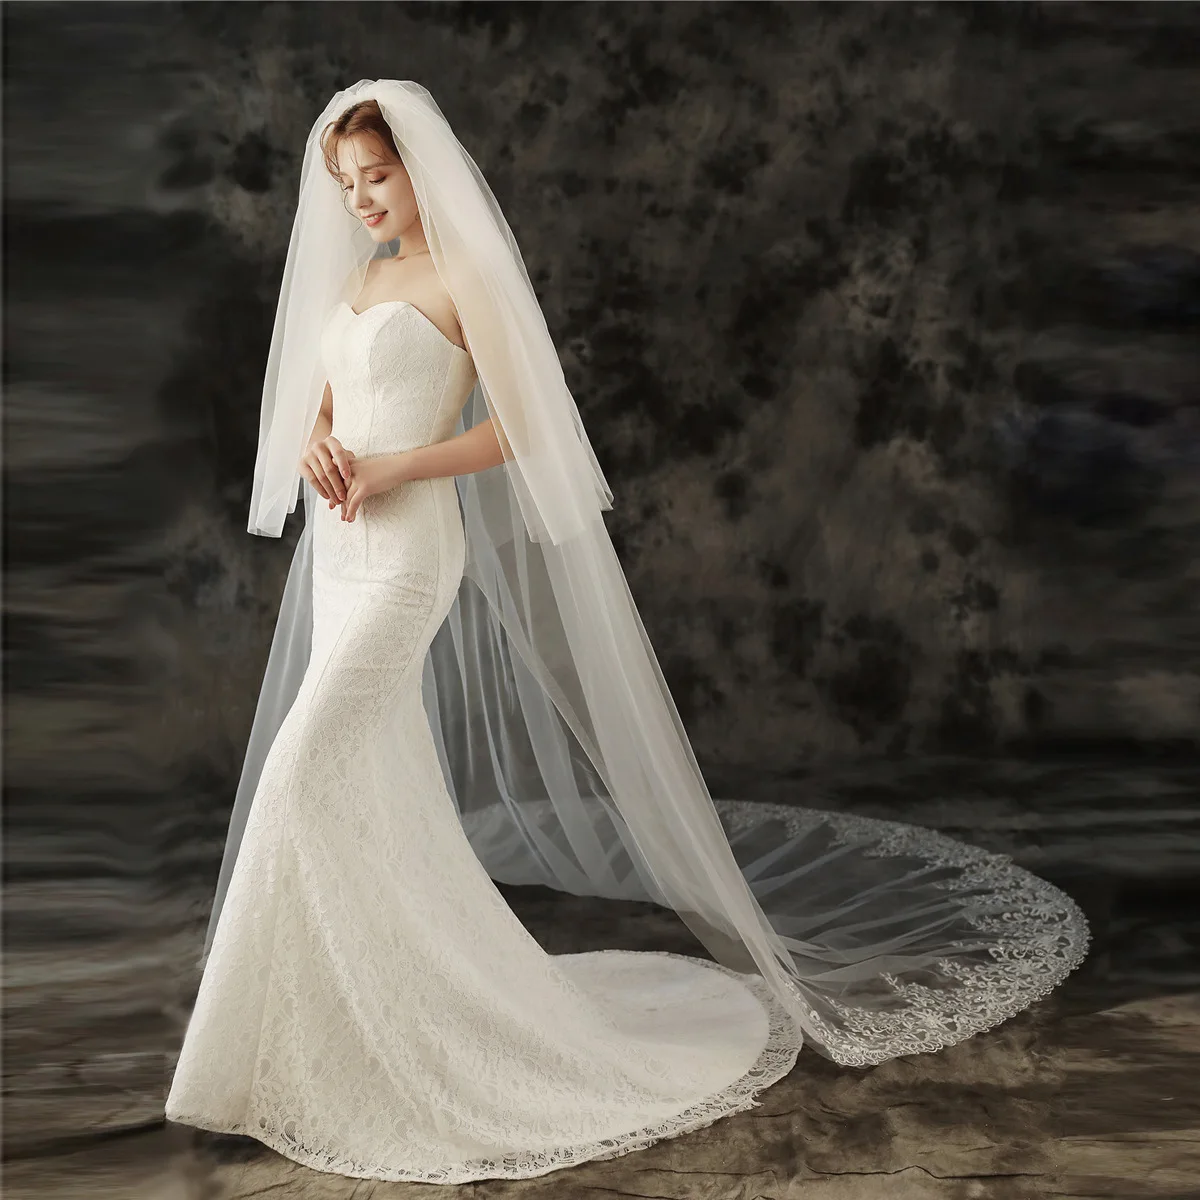 

2021 New Arrival Long Cathedral Wedding Veil with face cover 3M Tulle Lace Edge Flower Bridal blusher Veils, White ivory color wedding veils